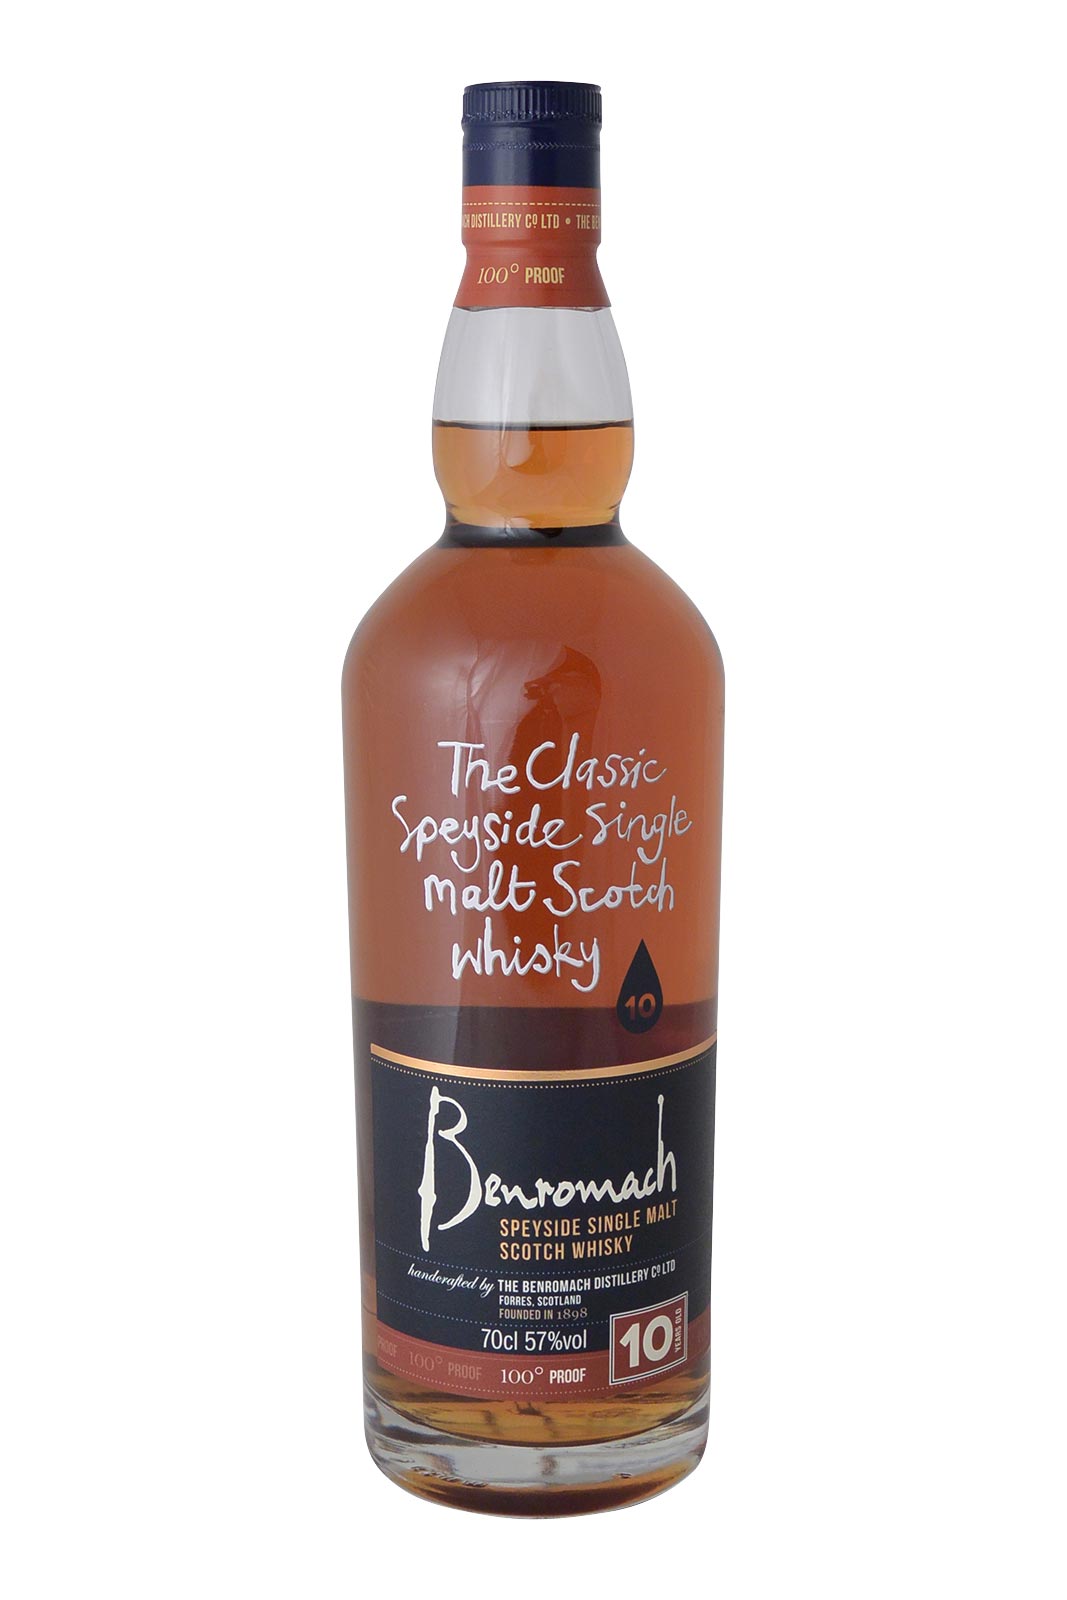 Benromach 10 Year Old 100° Proof